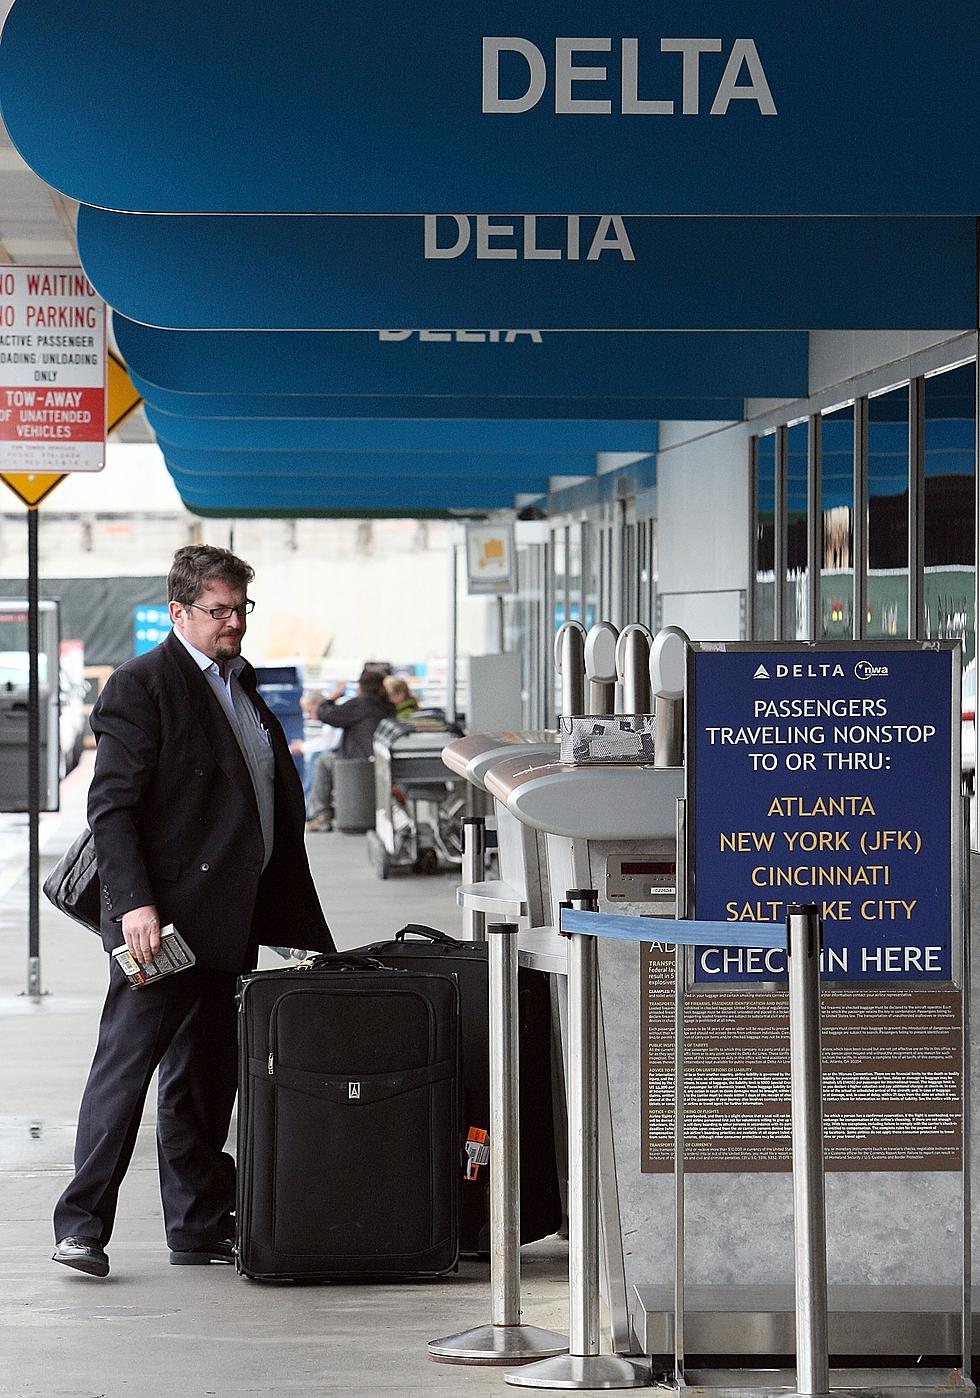 Delta, U.S. Air Reach Deal To Operate Daily Flights From CNY To NYC